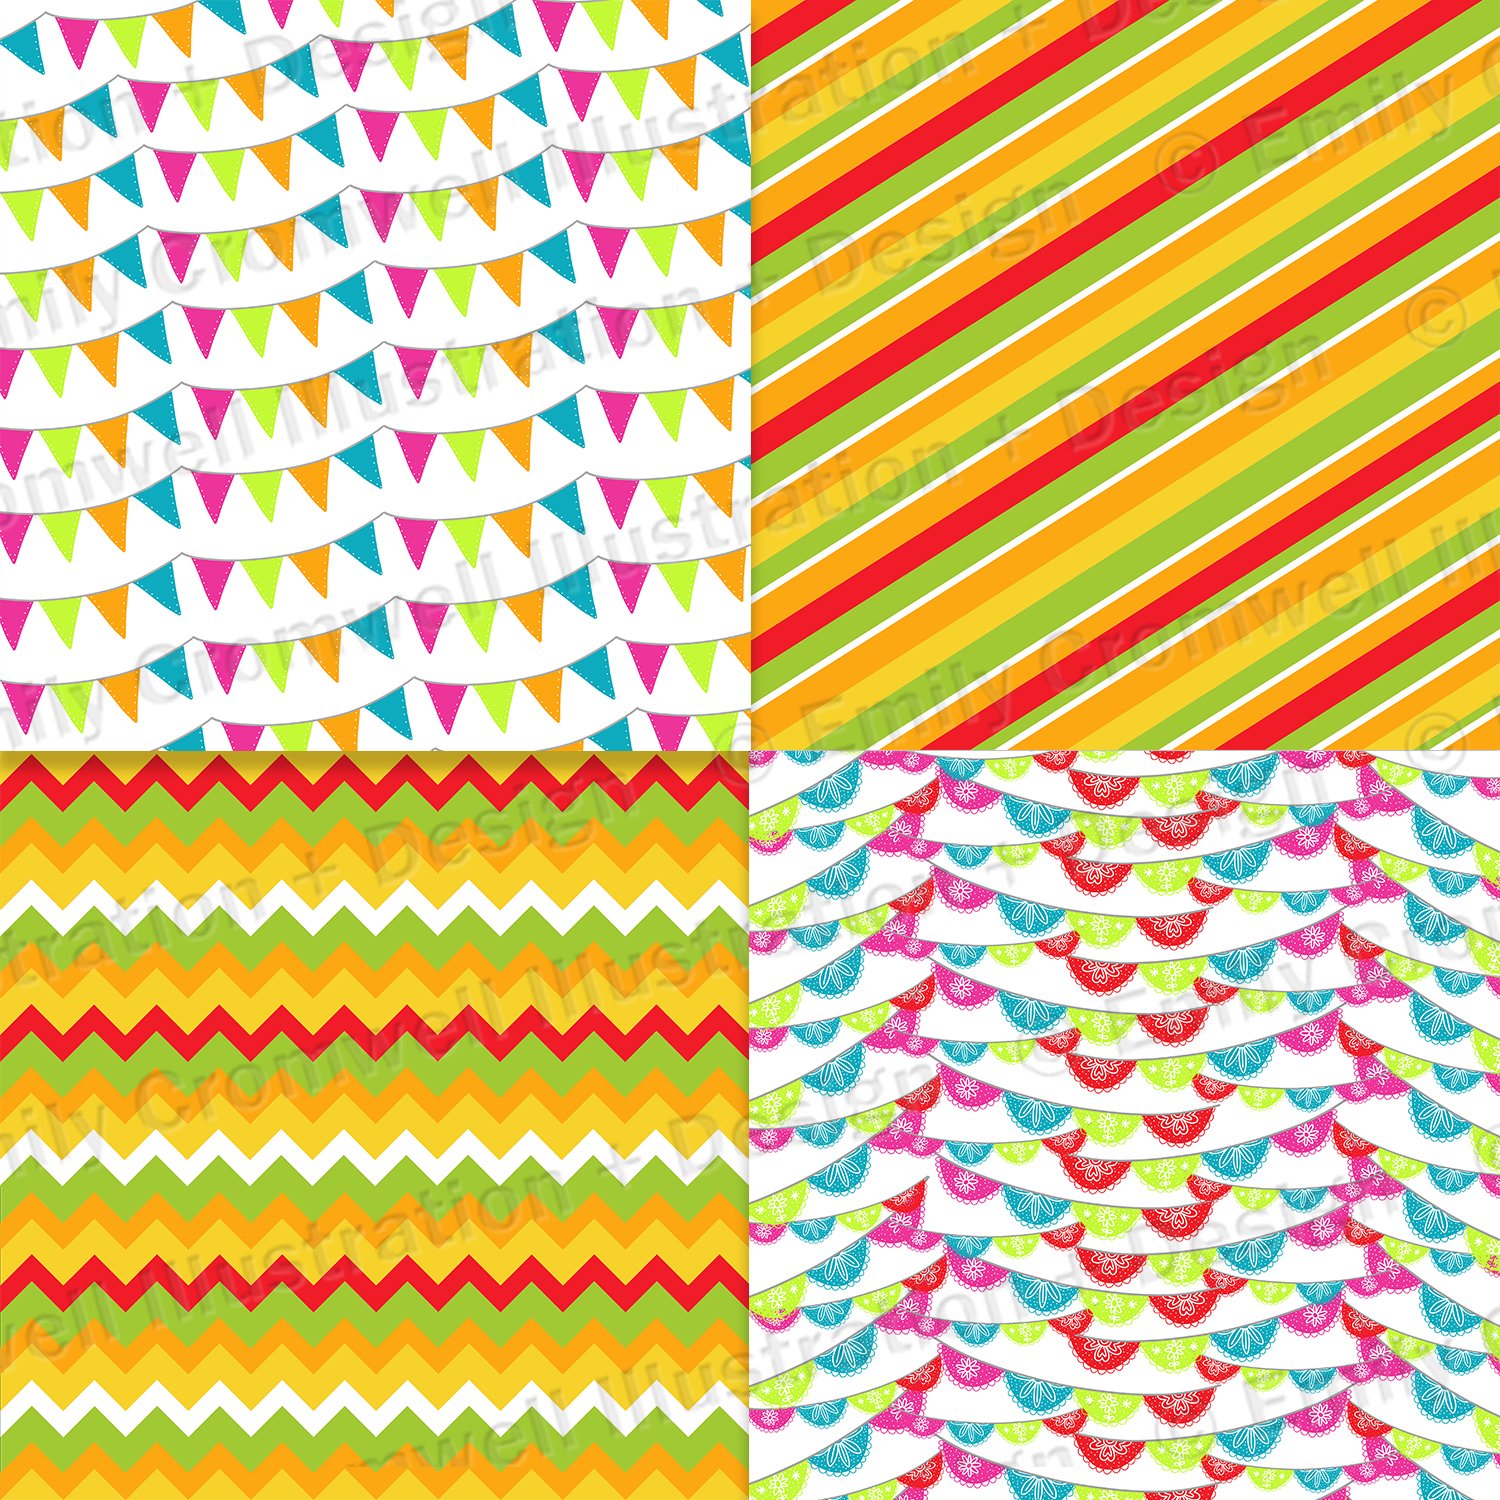 Colorful Mexican patterns with the different prints.